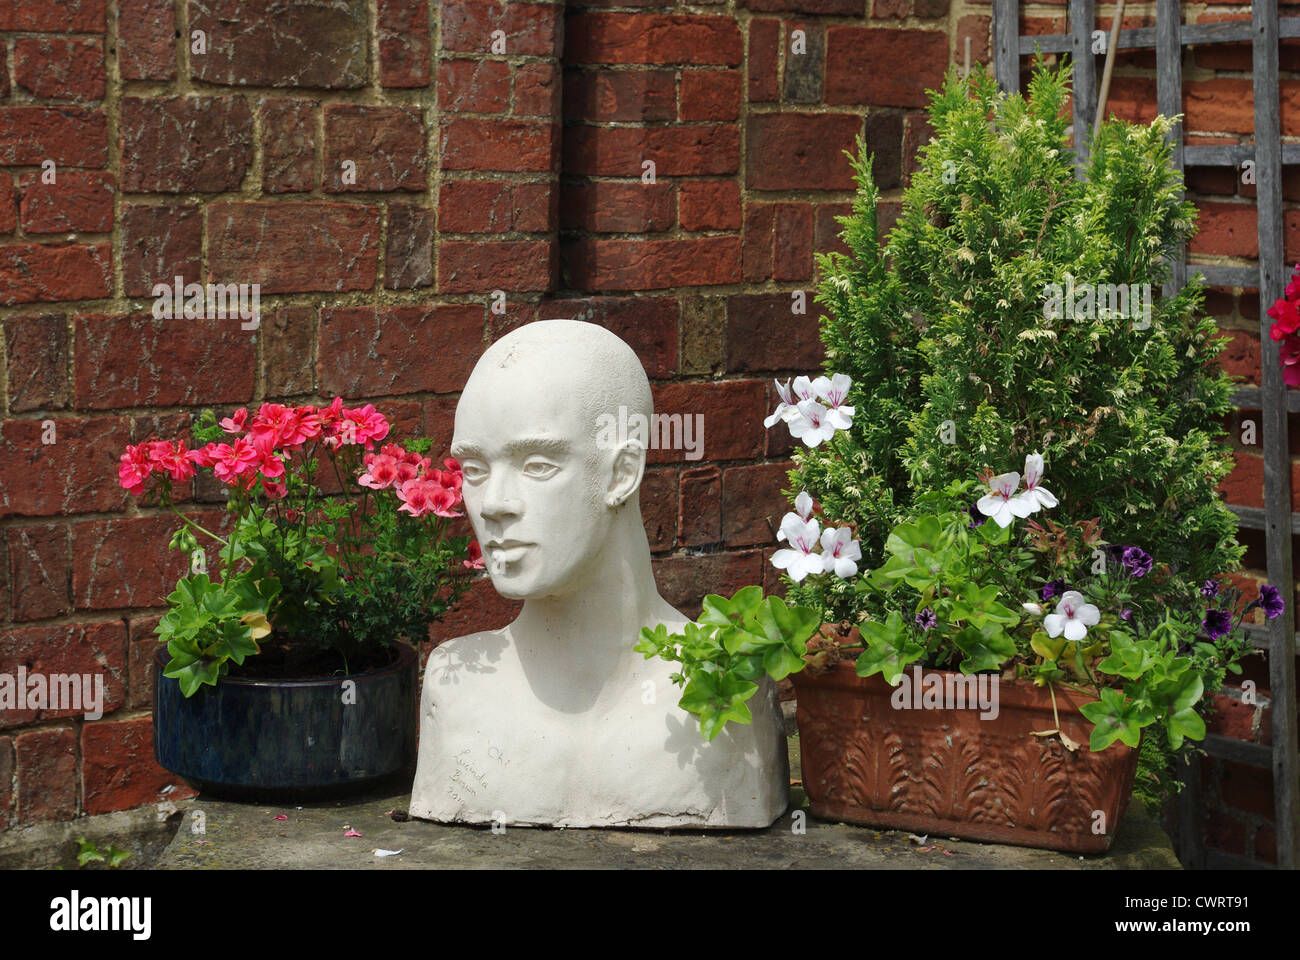 White plaster bust of a man's head, surrounded by flowers and plants Stock Photo